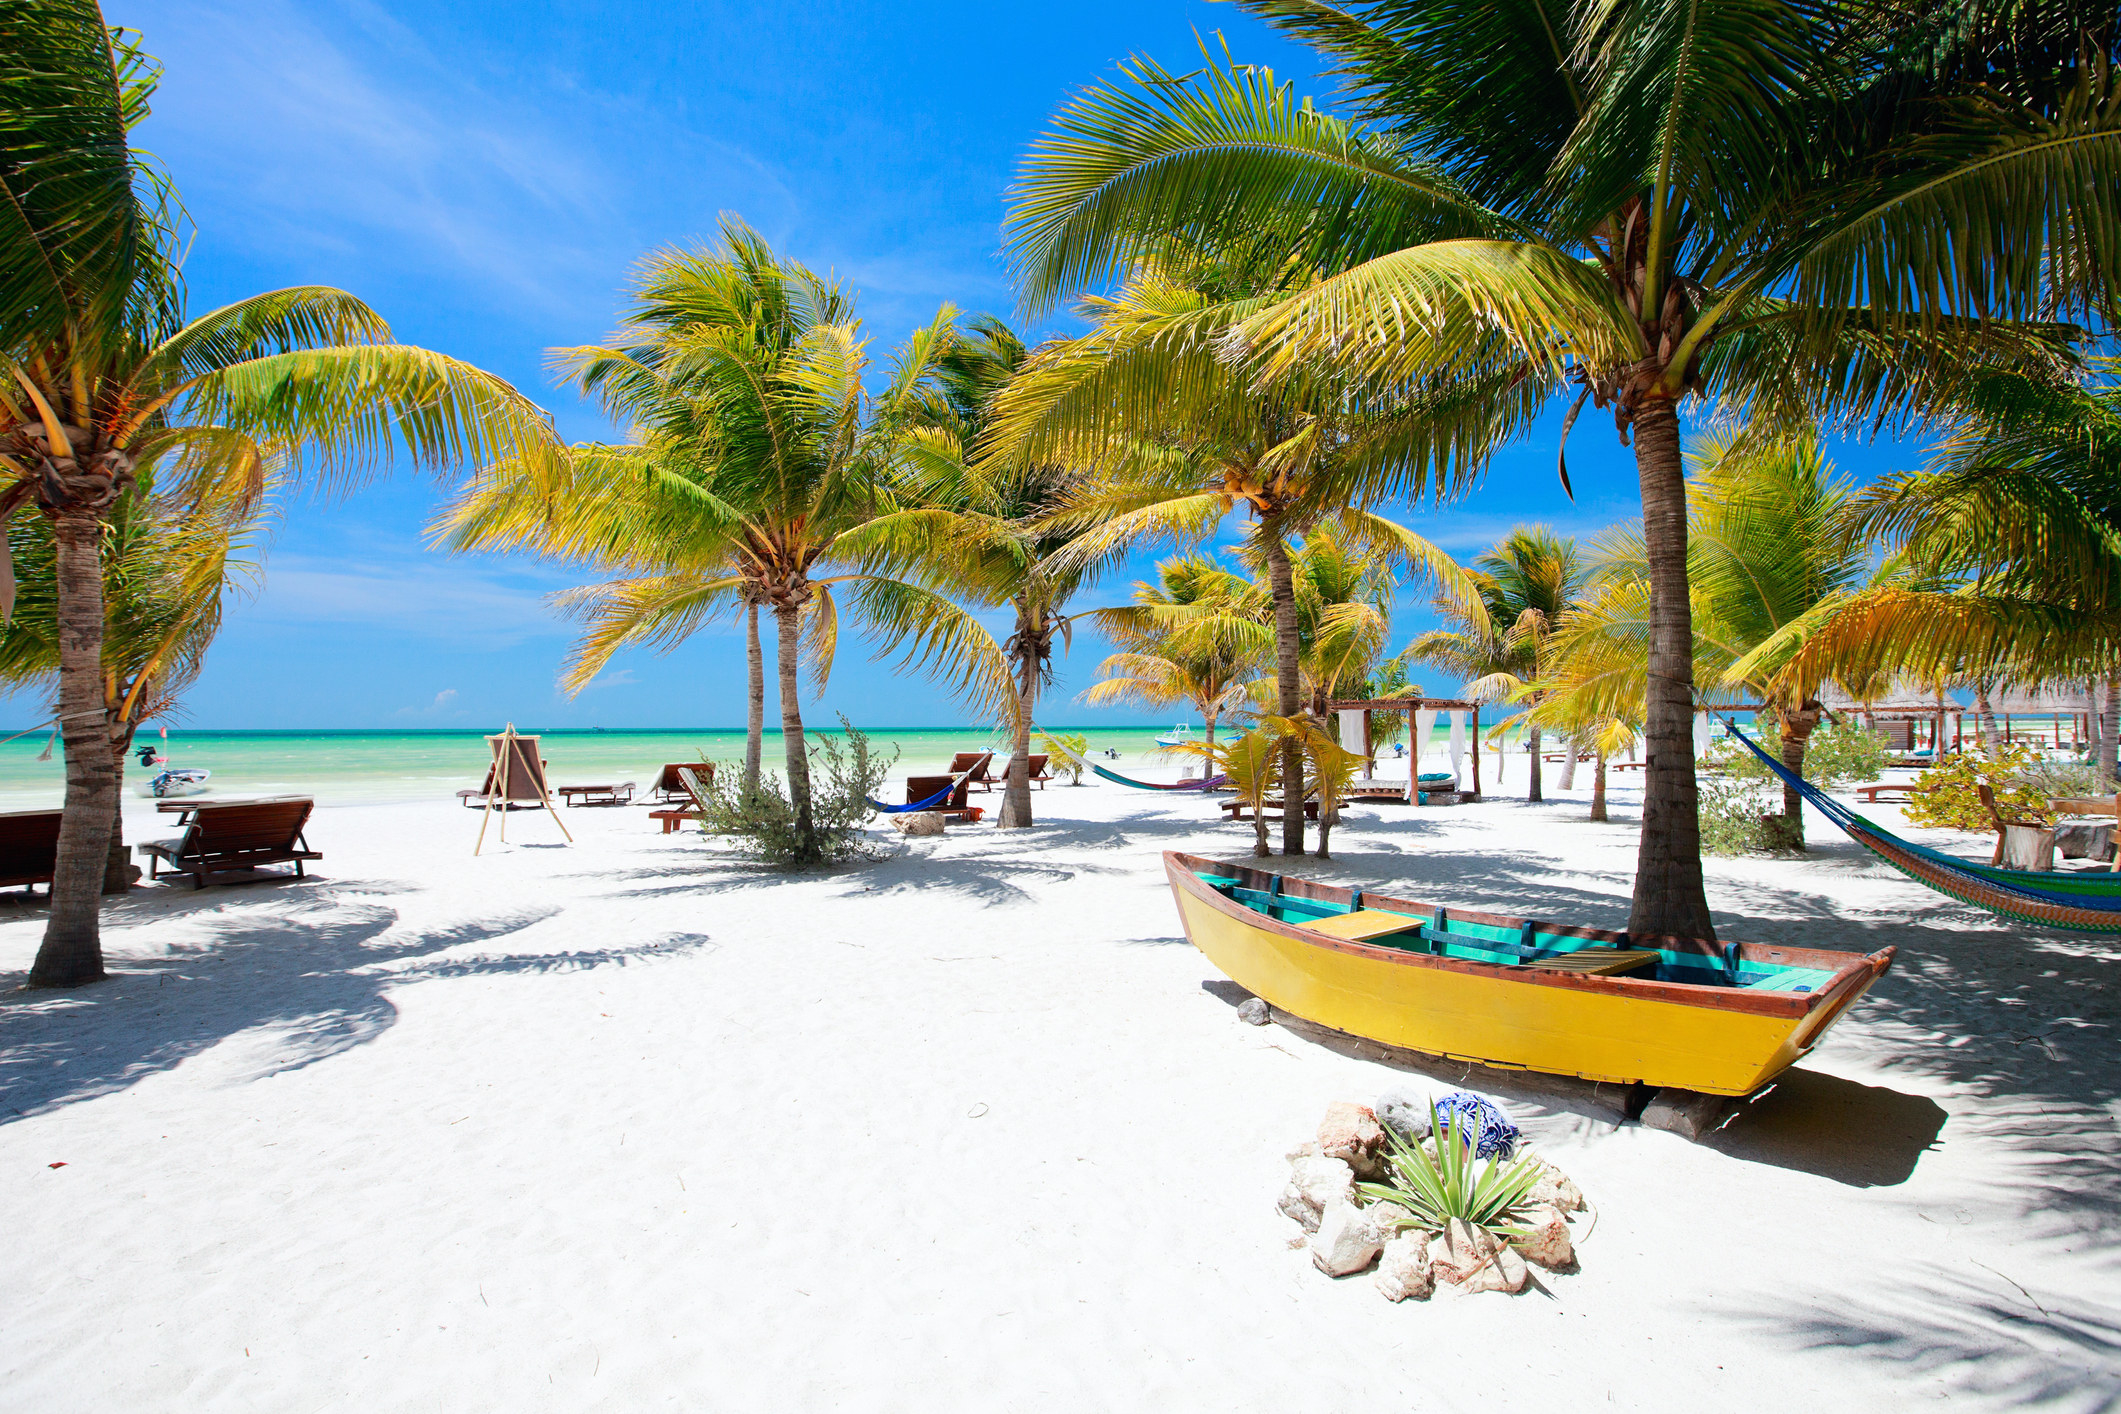 A white sand tropical beach with palm trees.